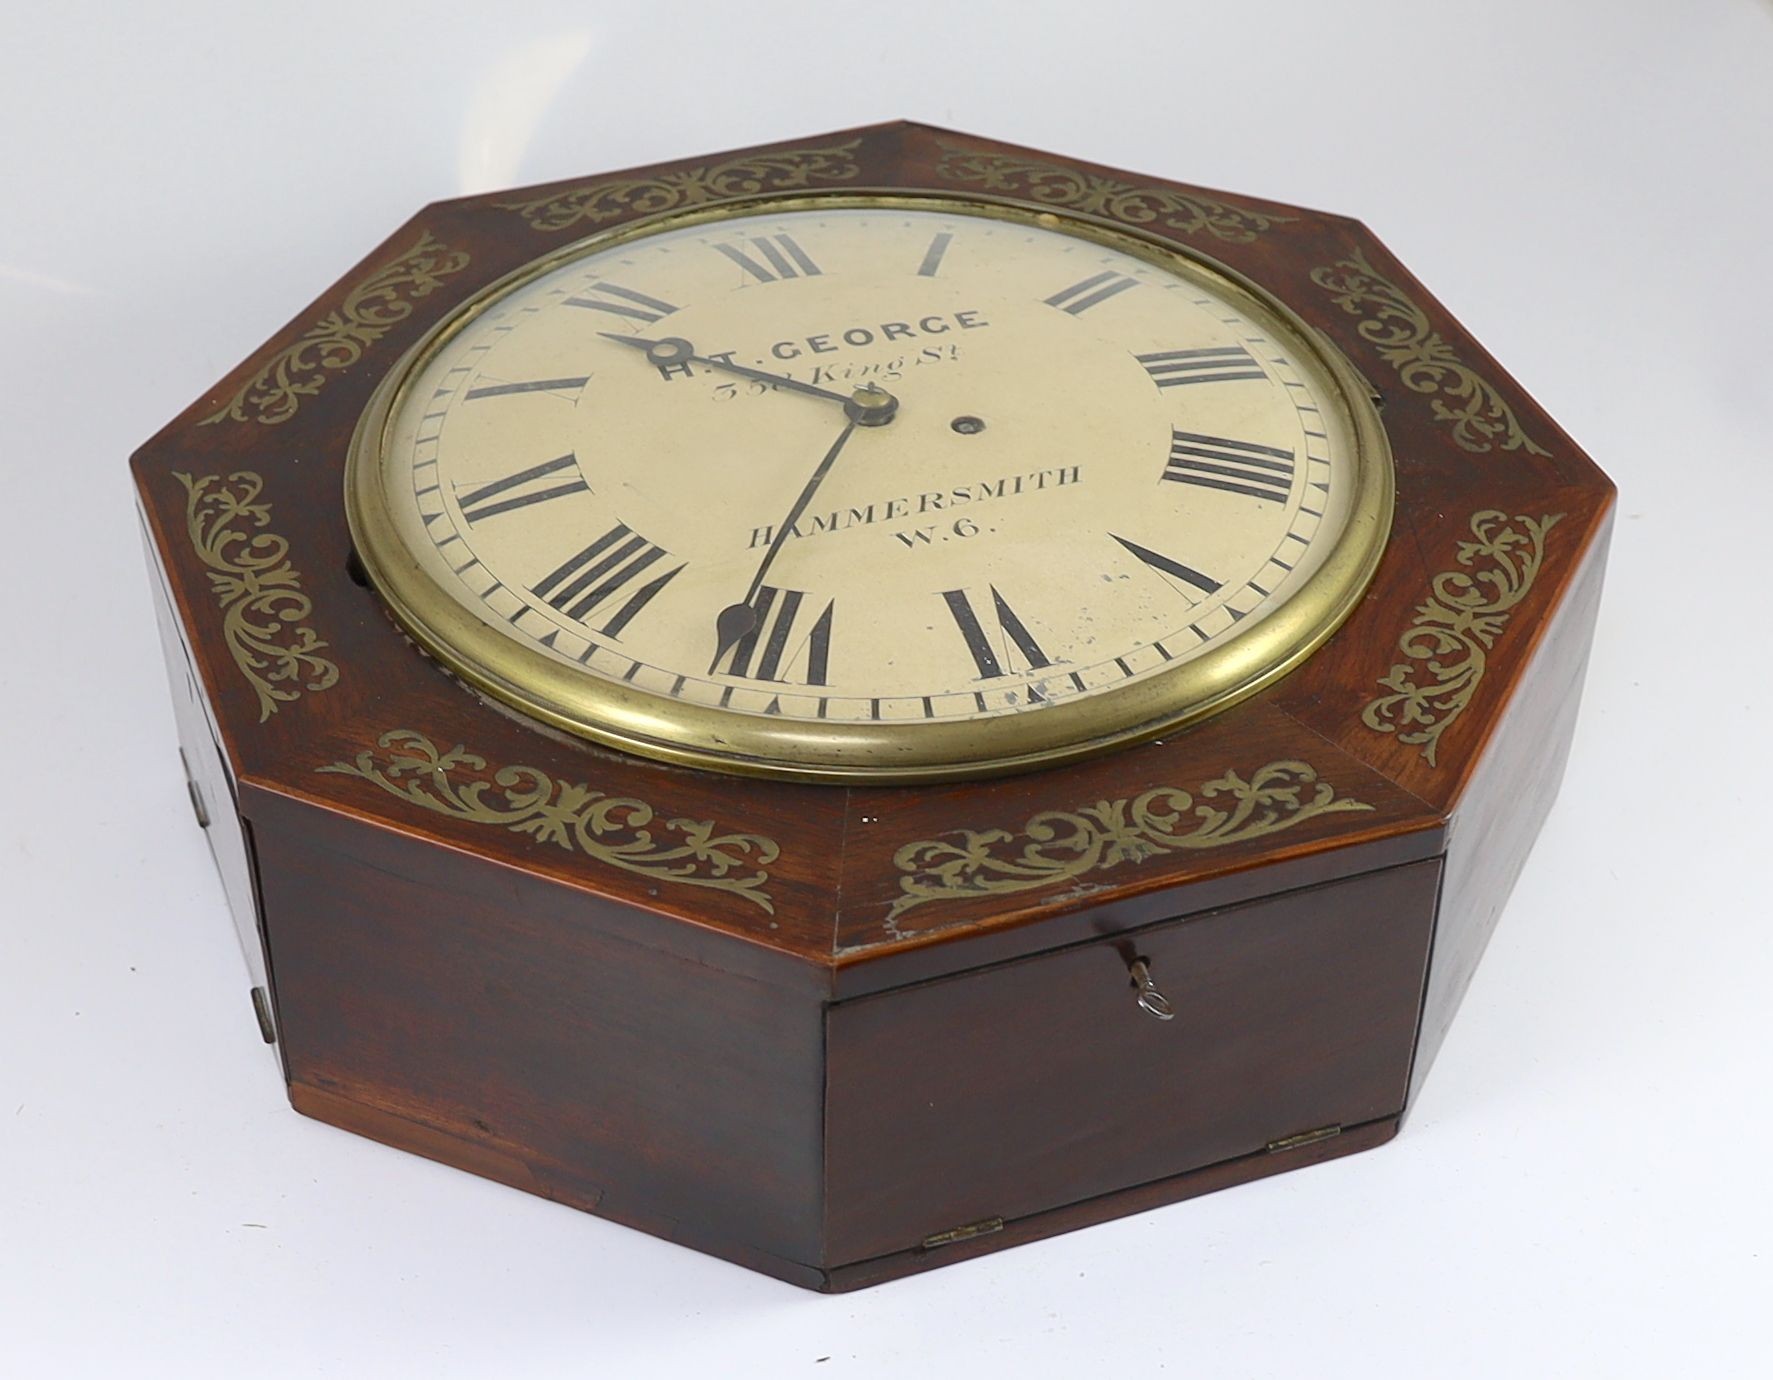 H.T. George, 358 King St, Hammersmith. A William IV octagonal rosewood dial clock 43cm.